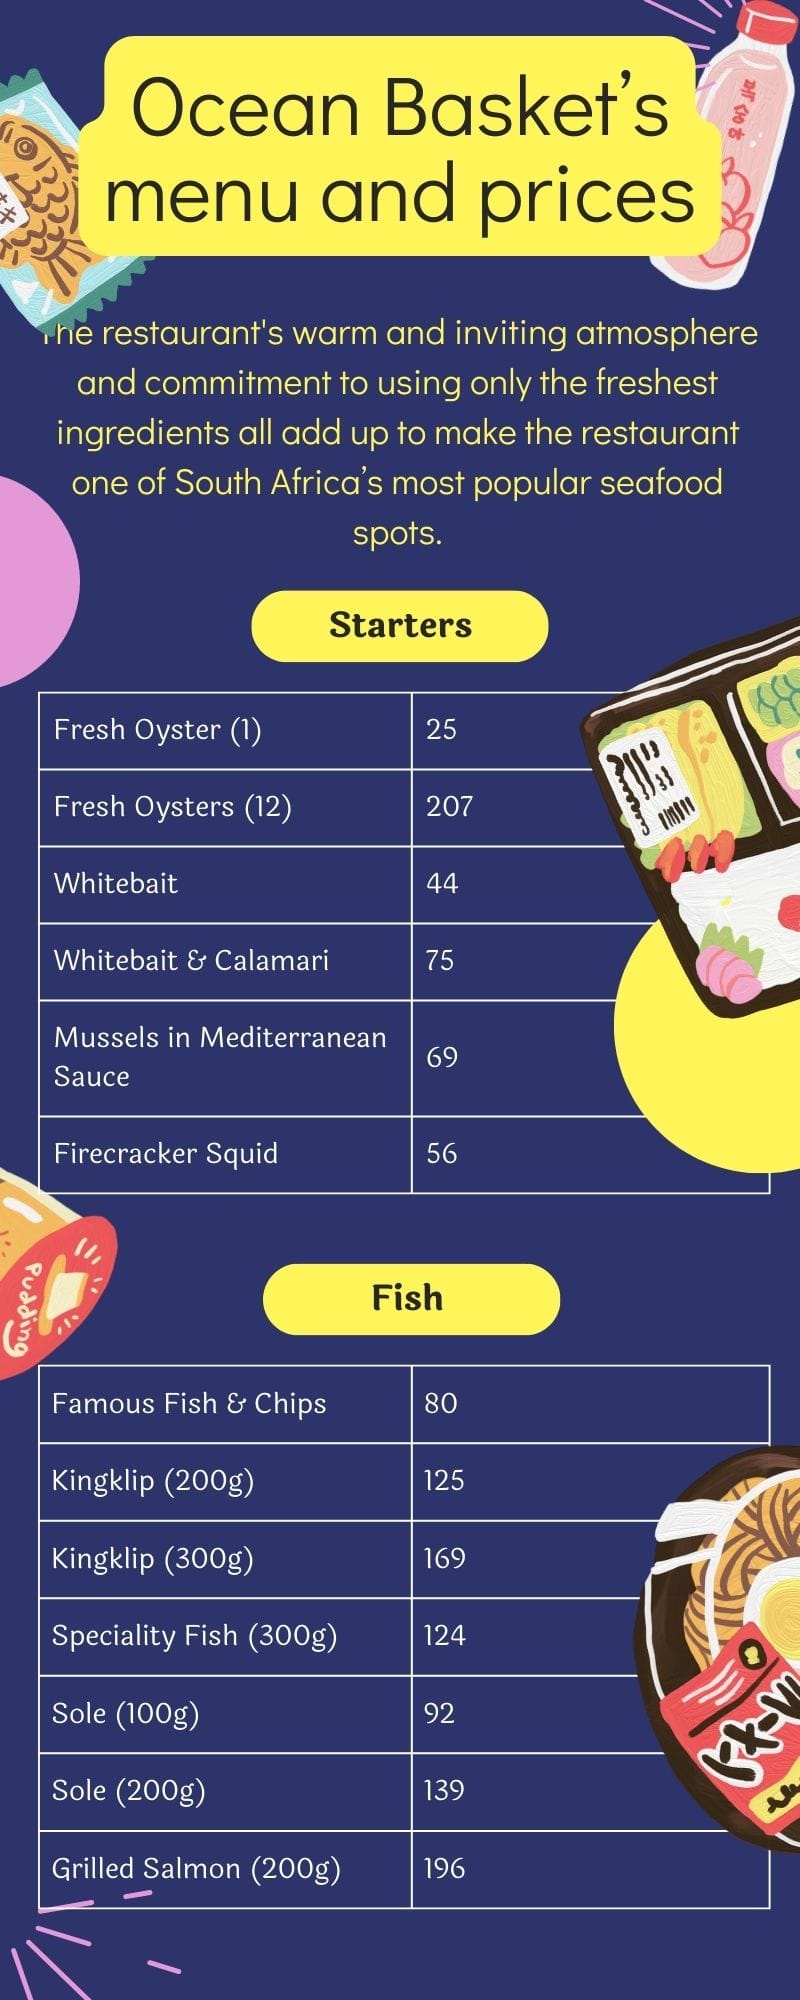 Ocean Basket’s menu and prices in South Africa